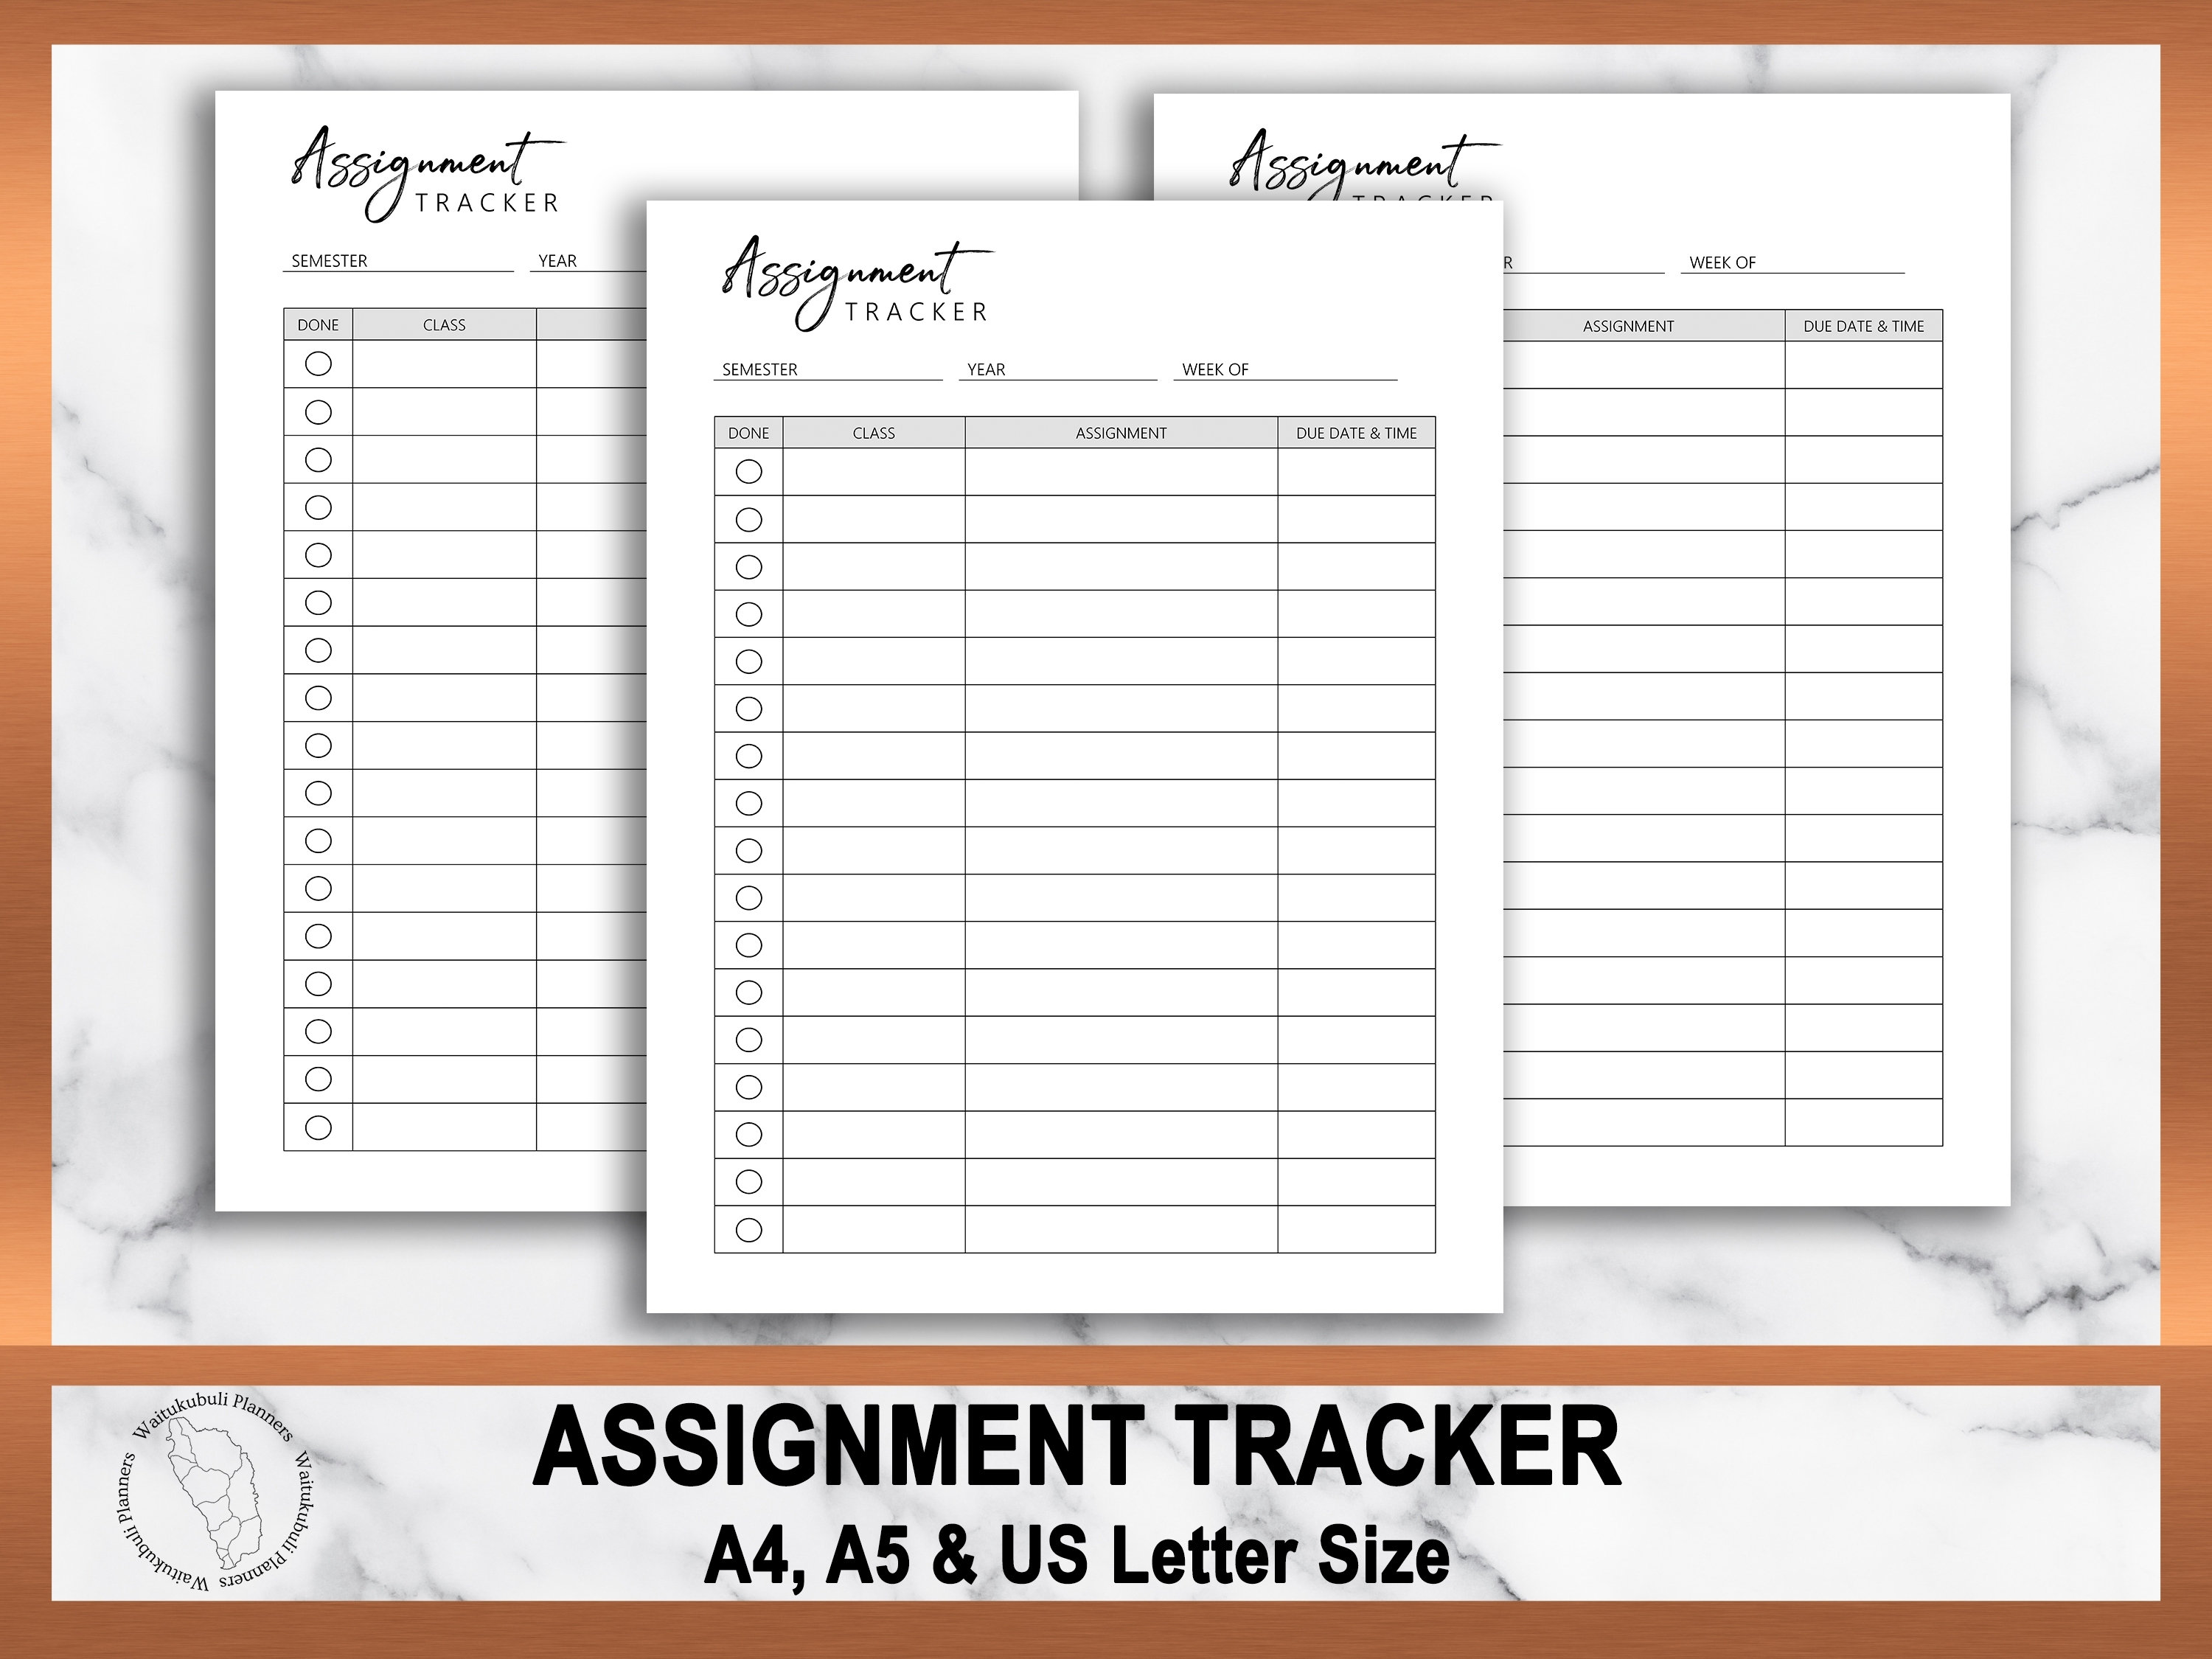 student assignment tracking sheet